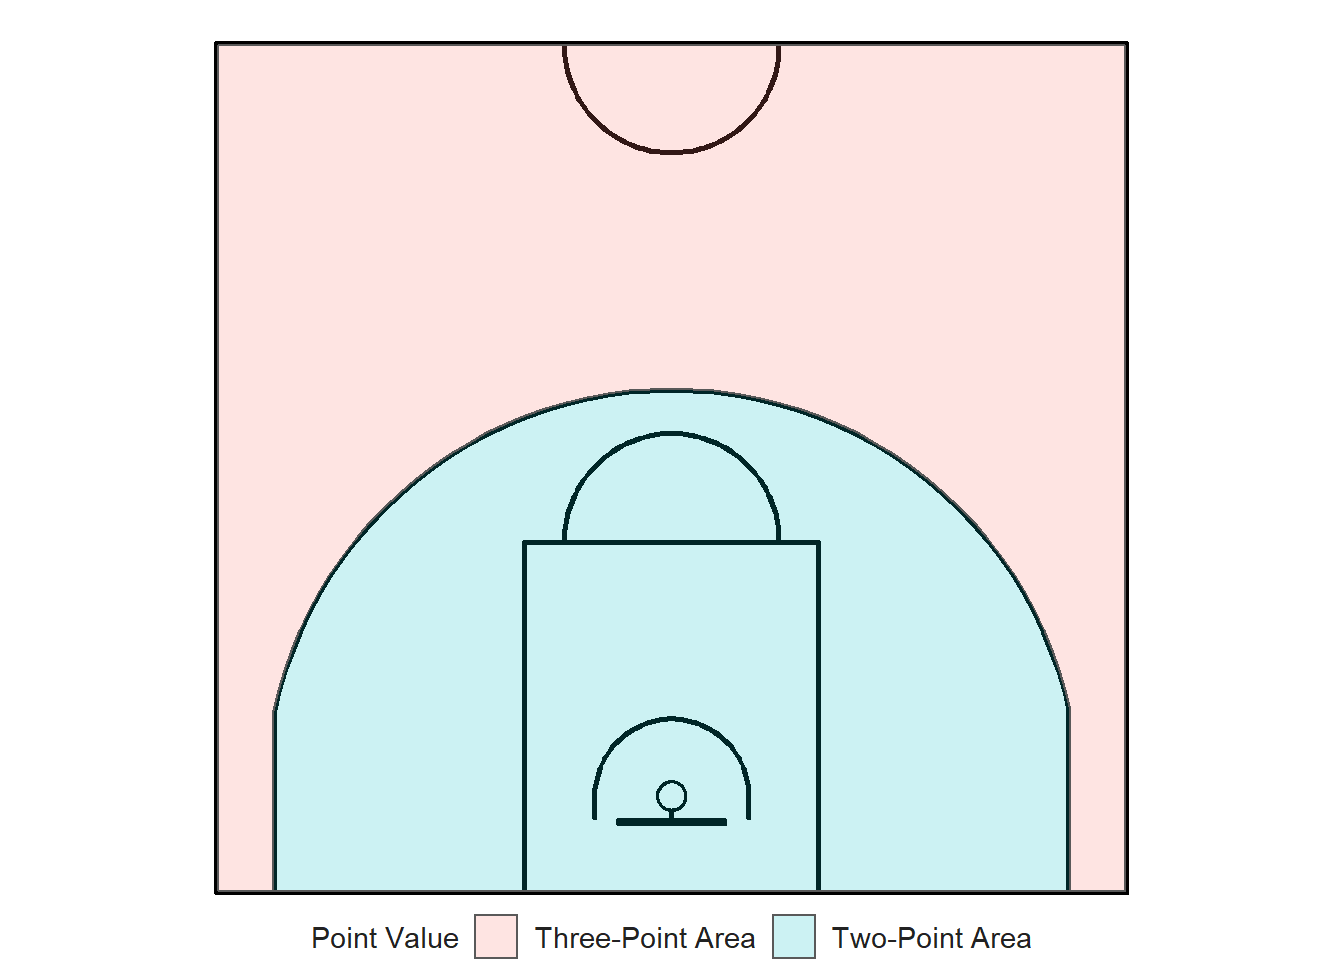 Point-value zones for FIBA basketball court